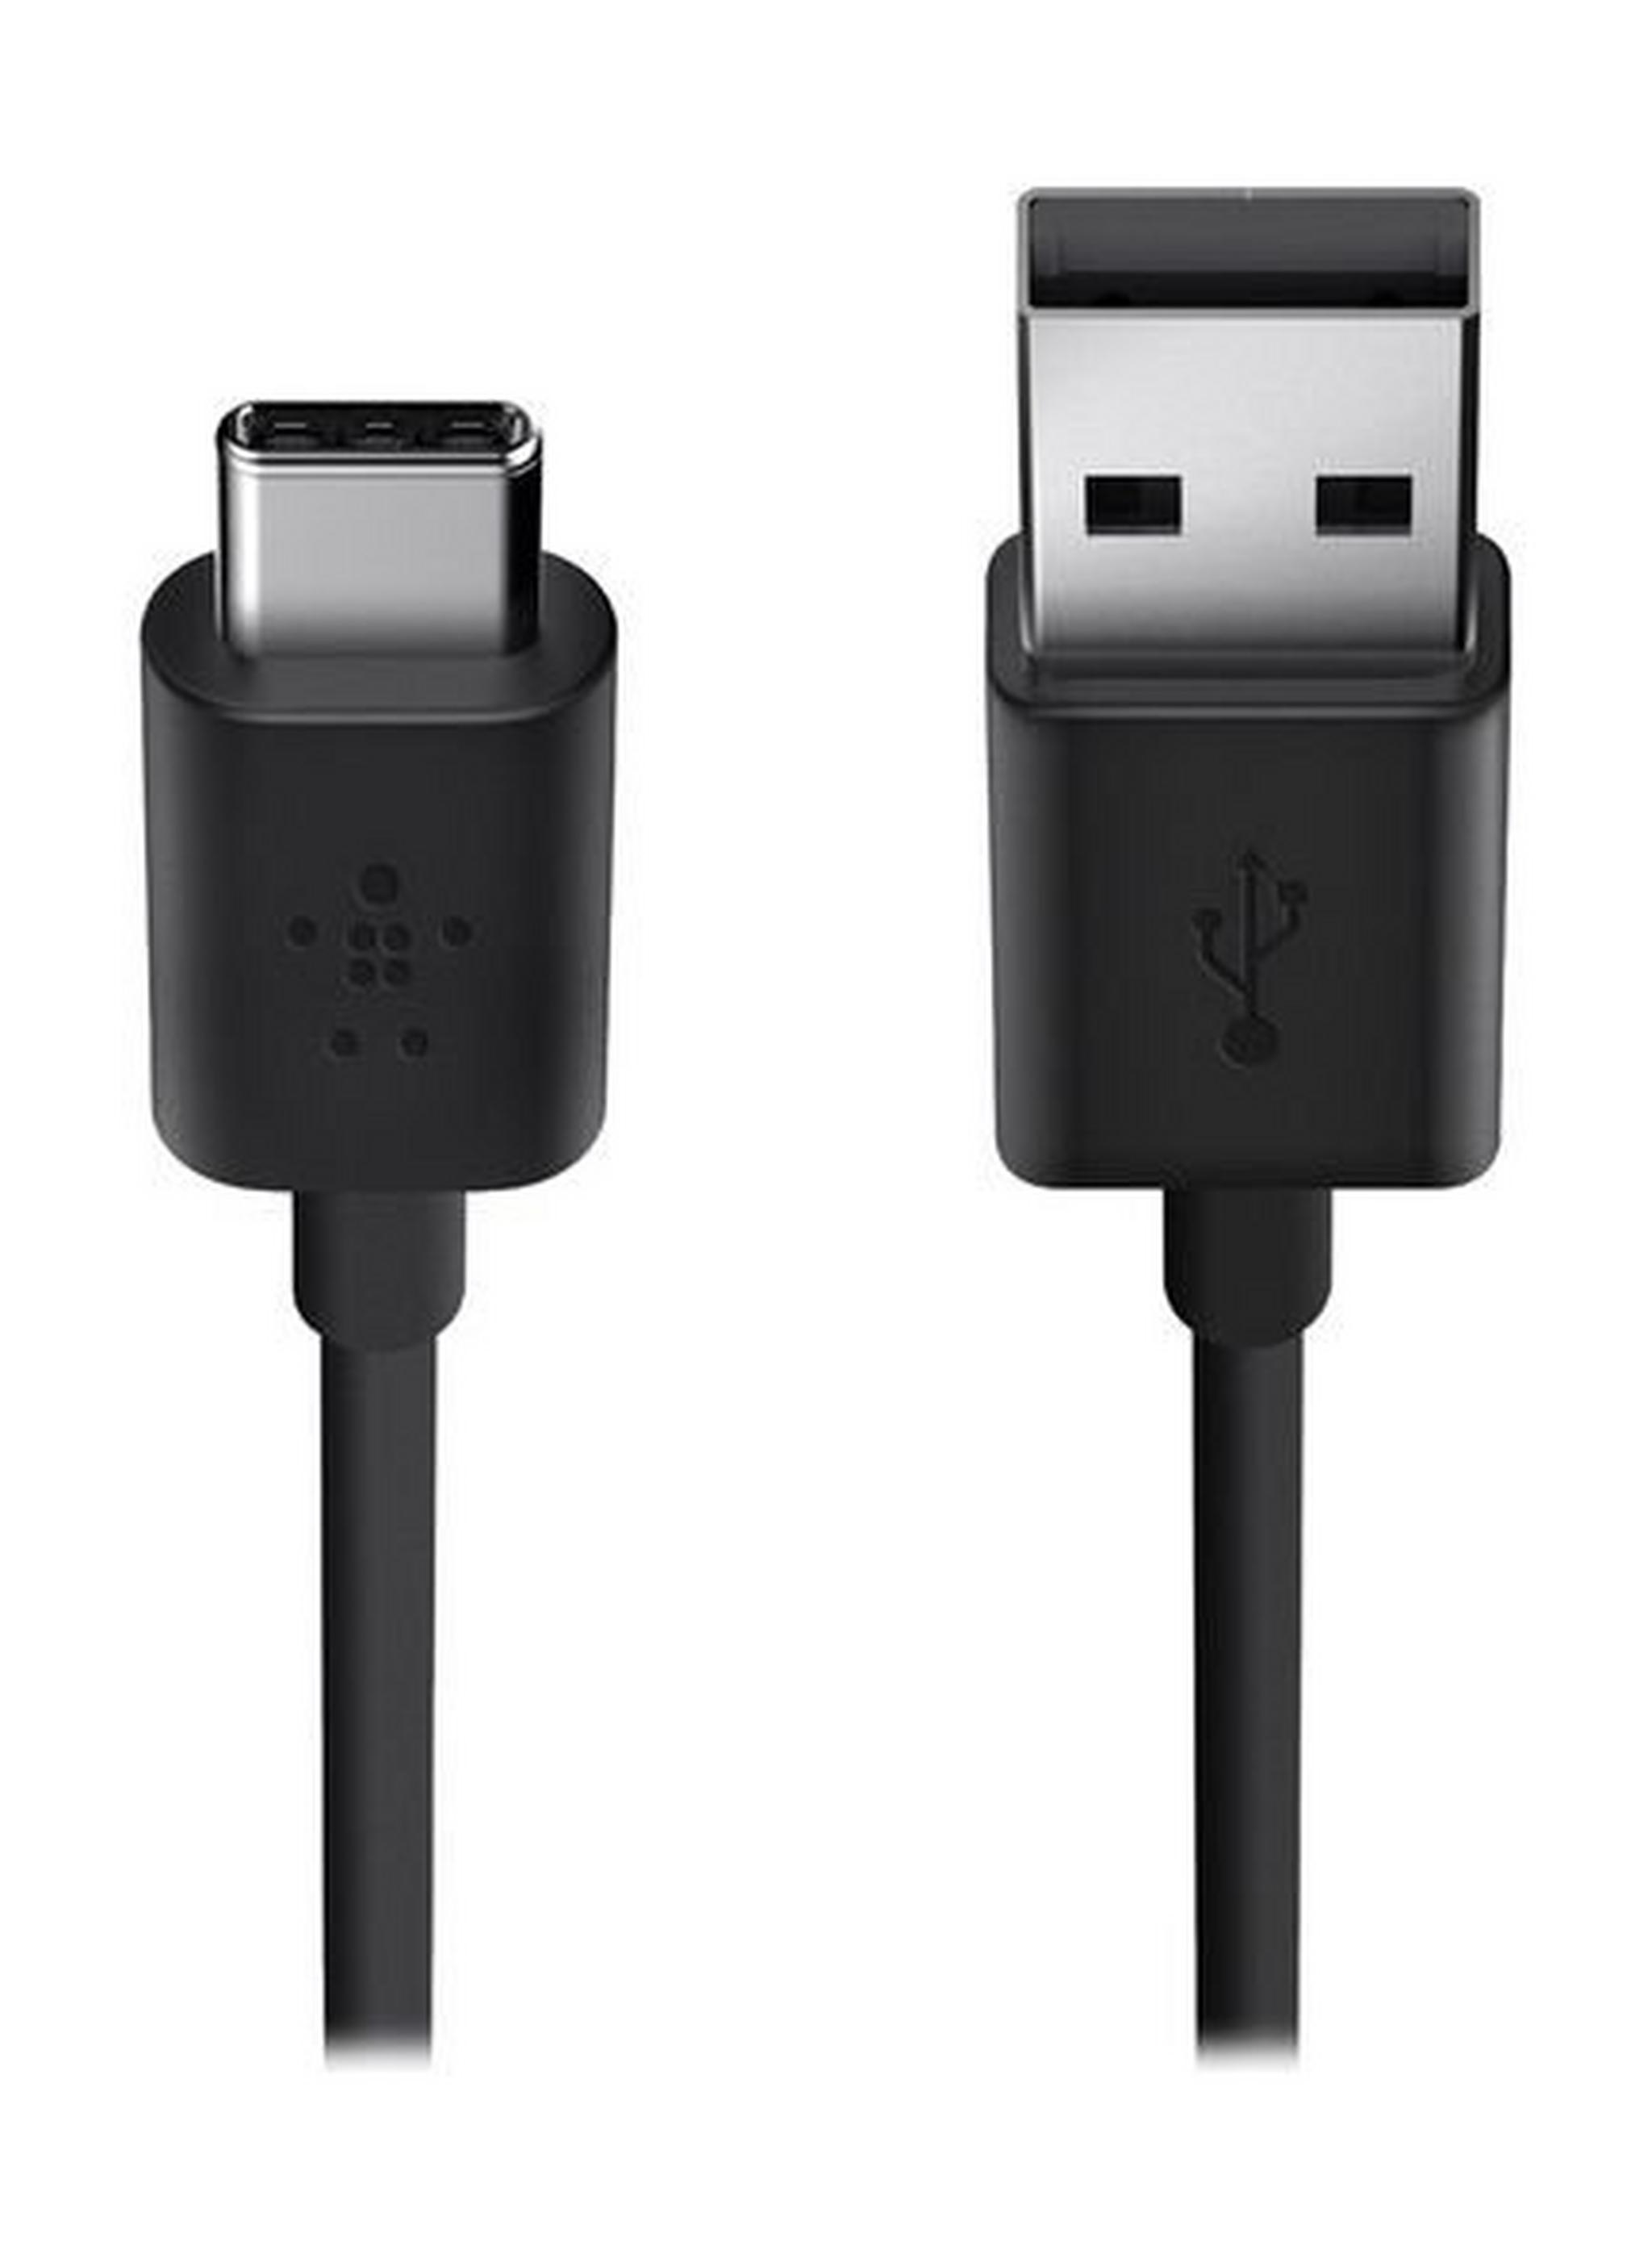 Belkin 2.0 USB-A to USB-C Charge Cable 1.8 M (F2CU032BT06) - Black